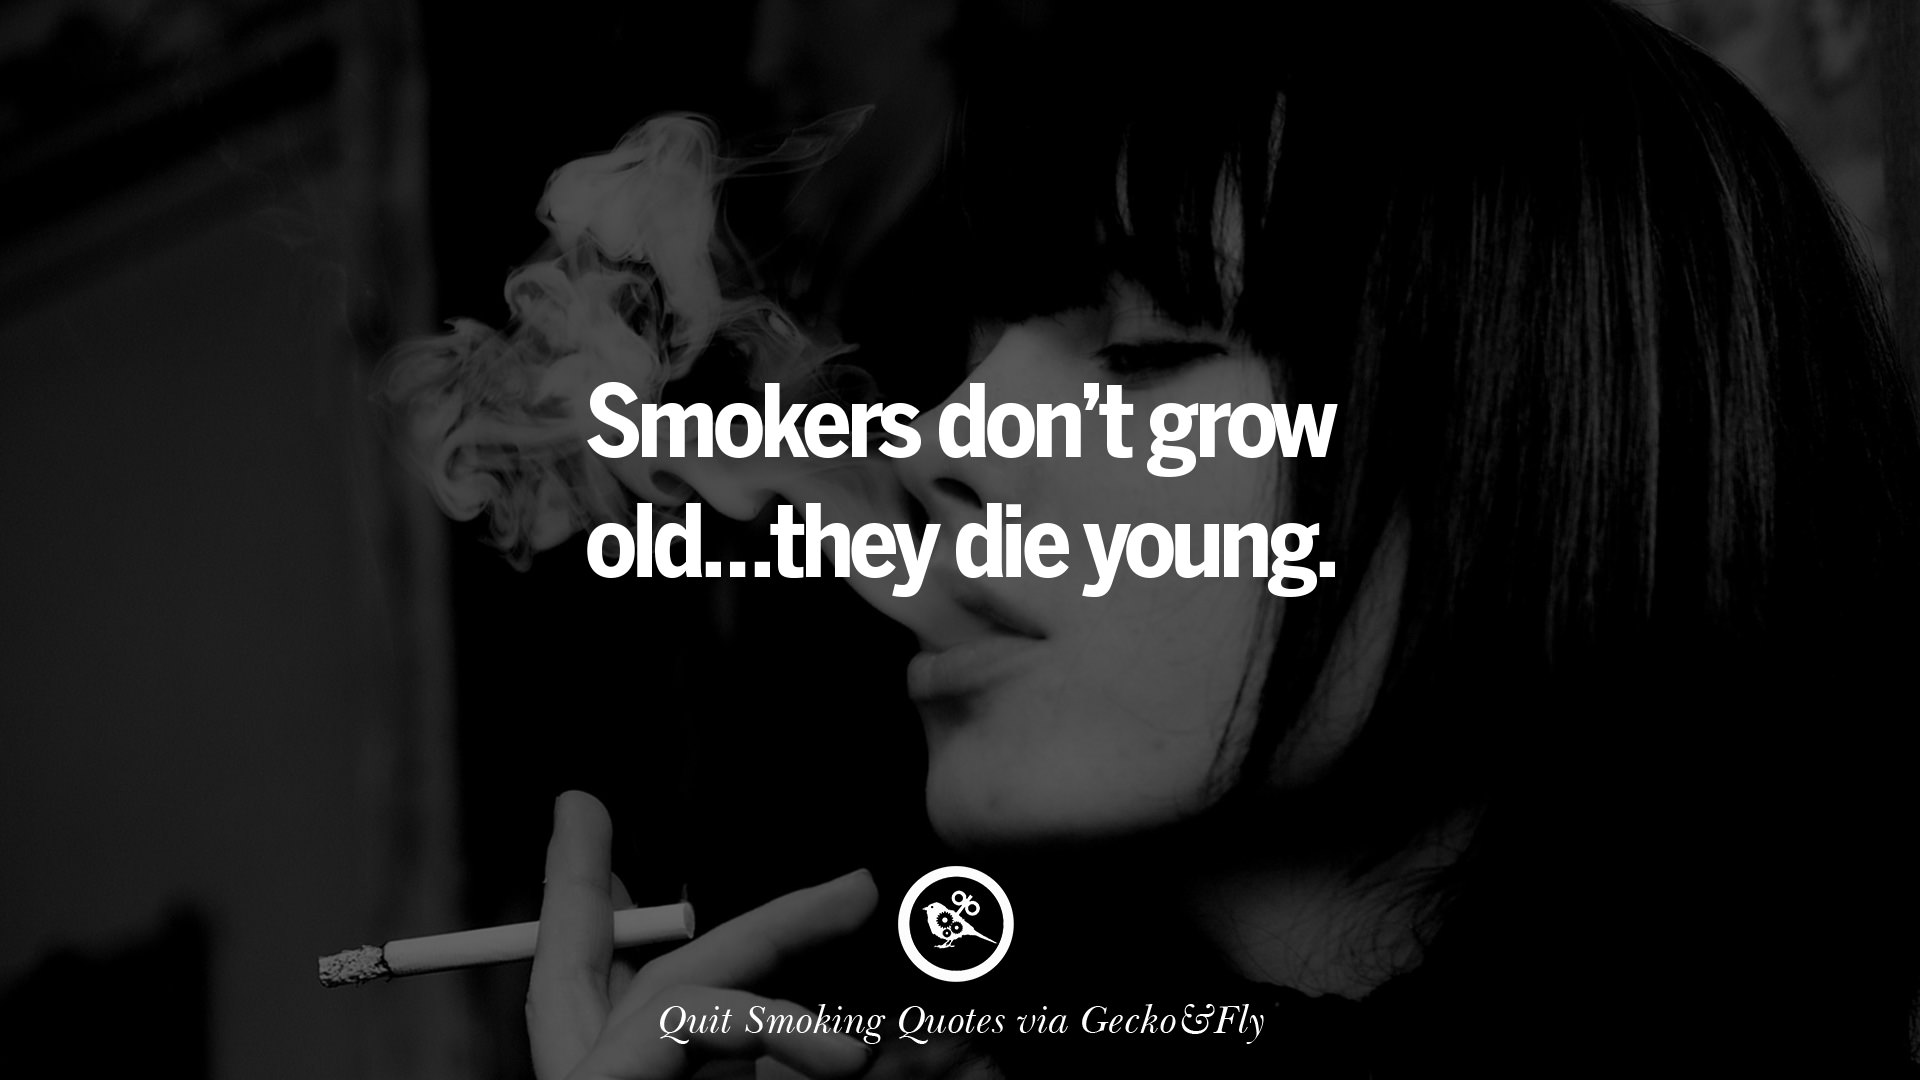 20 Motivational Slogans To Help You Quit Smoking And Stop